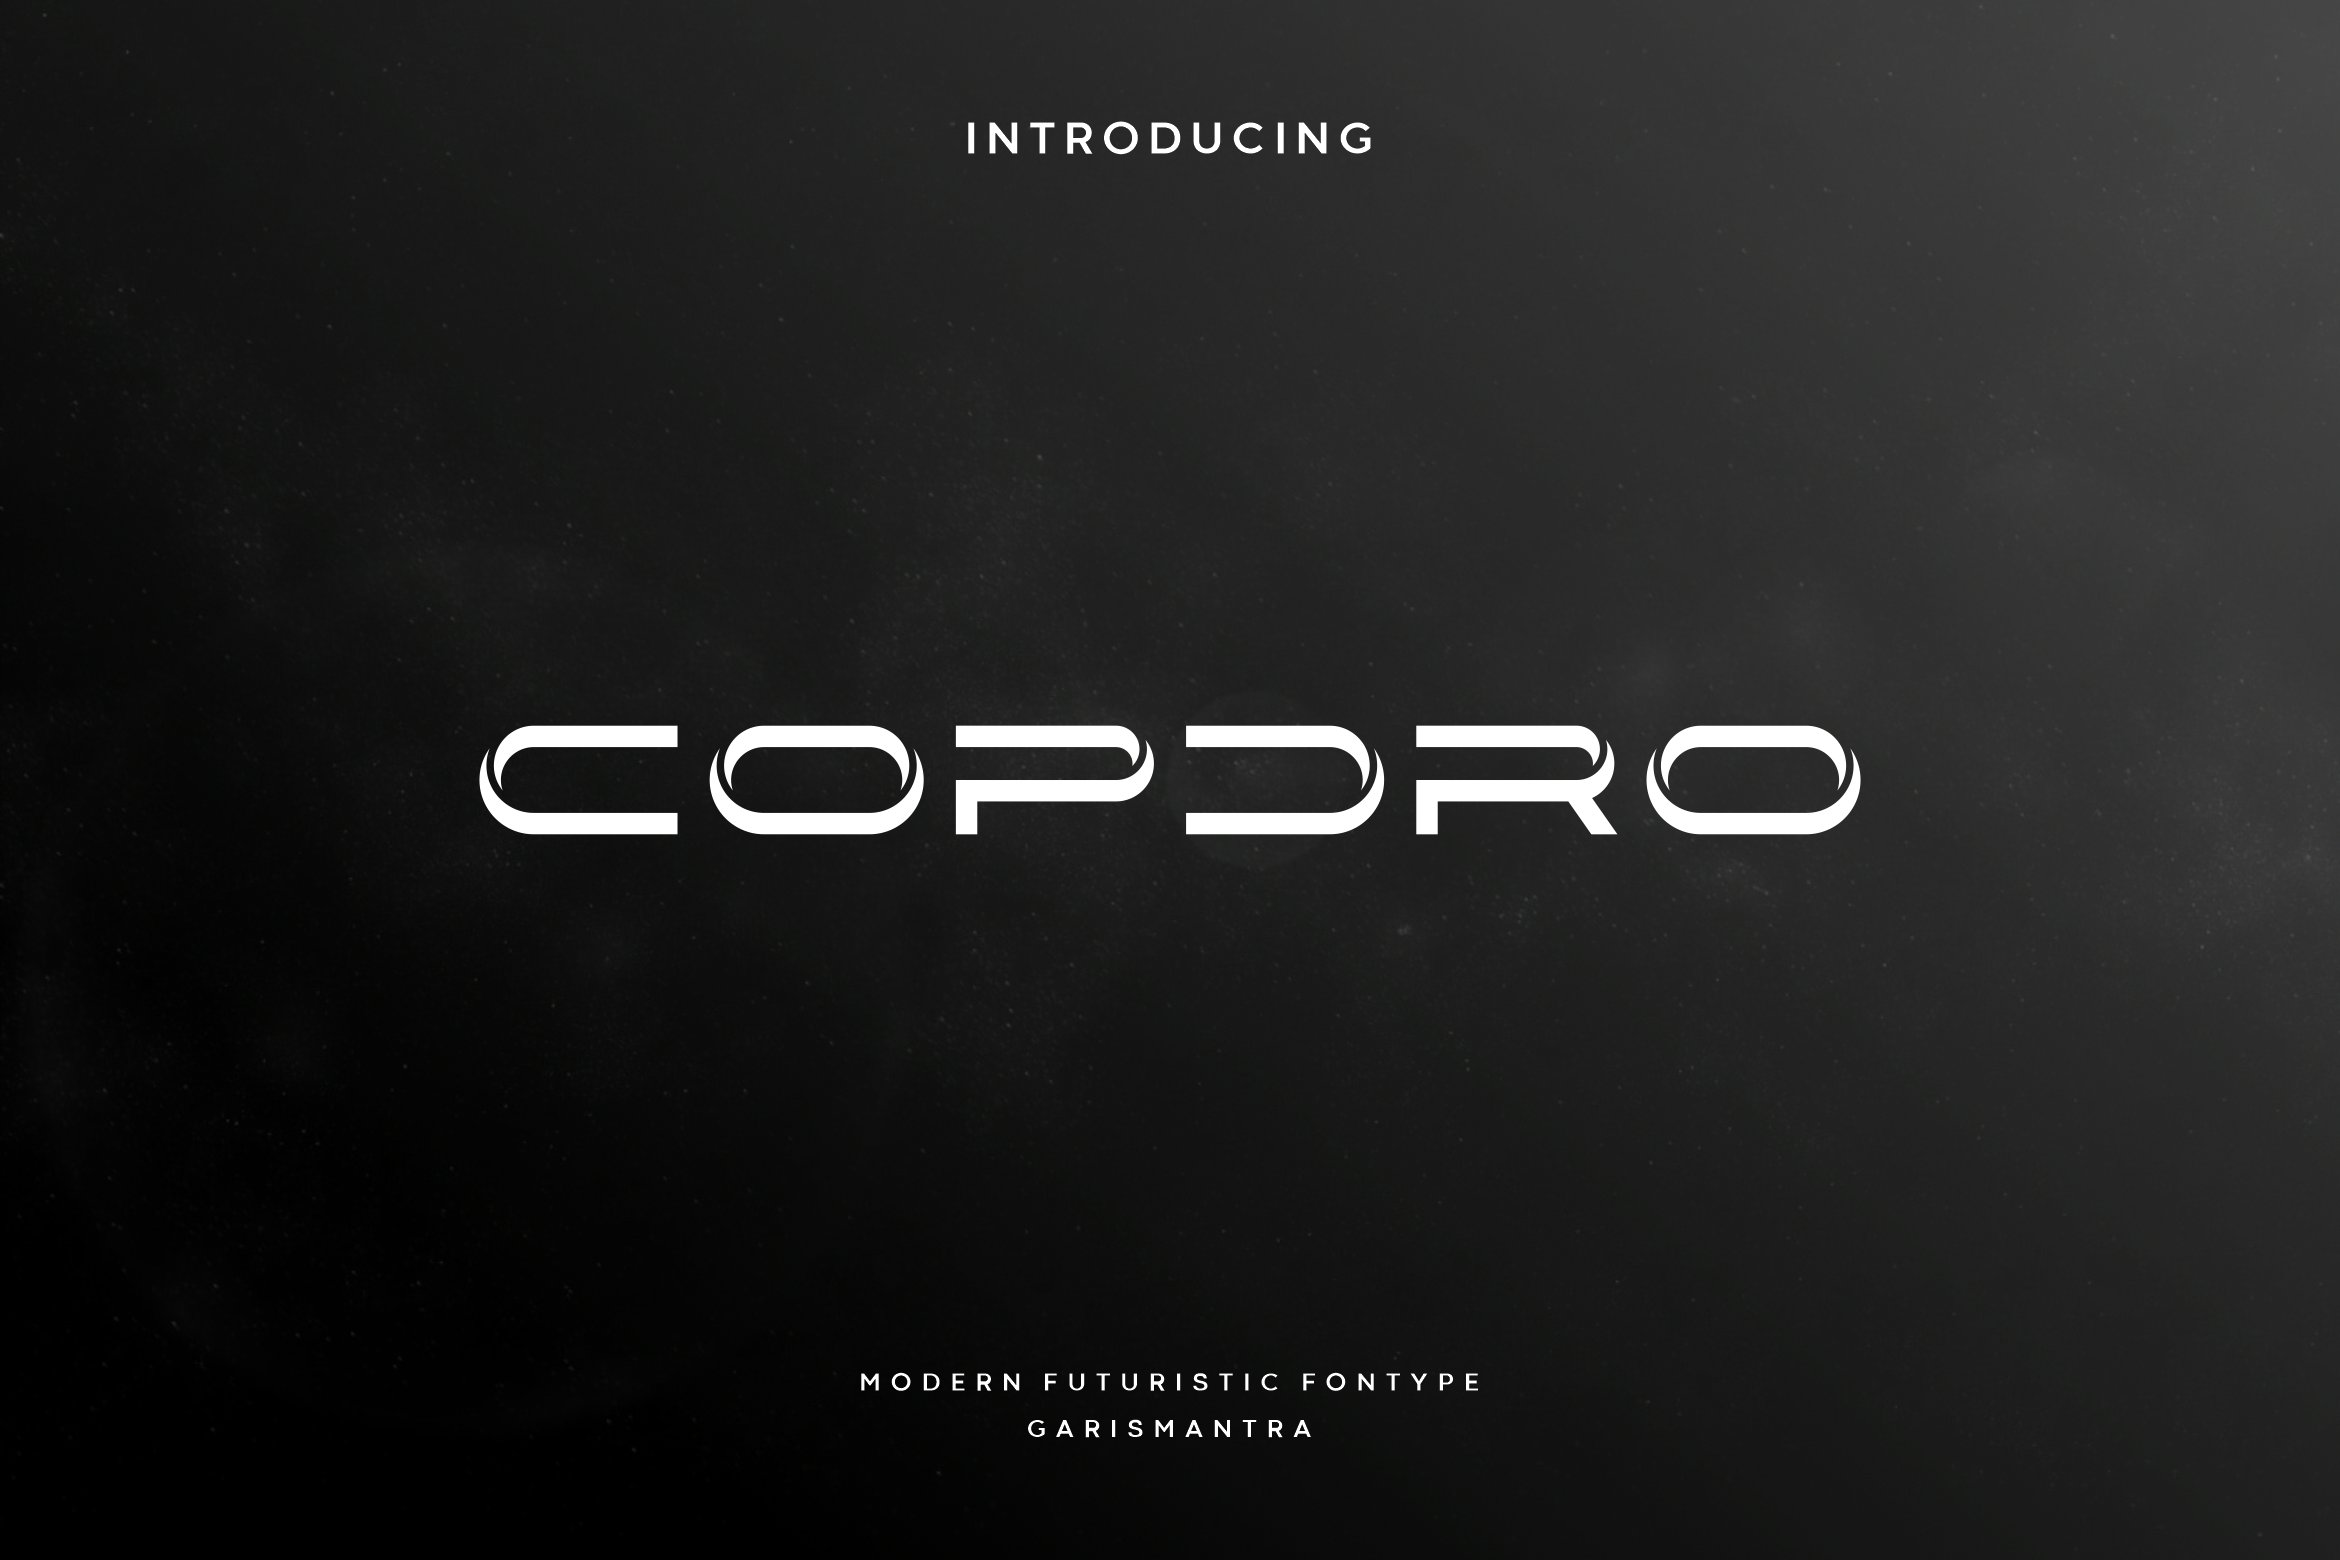 Copdro cover image.